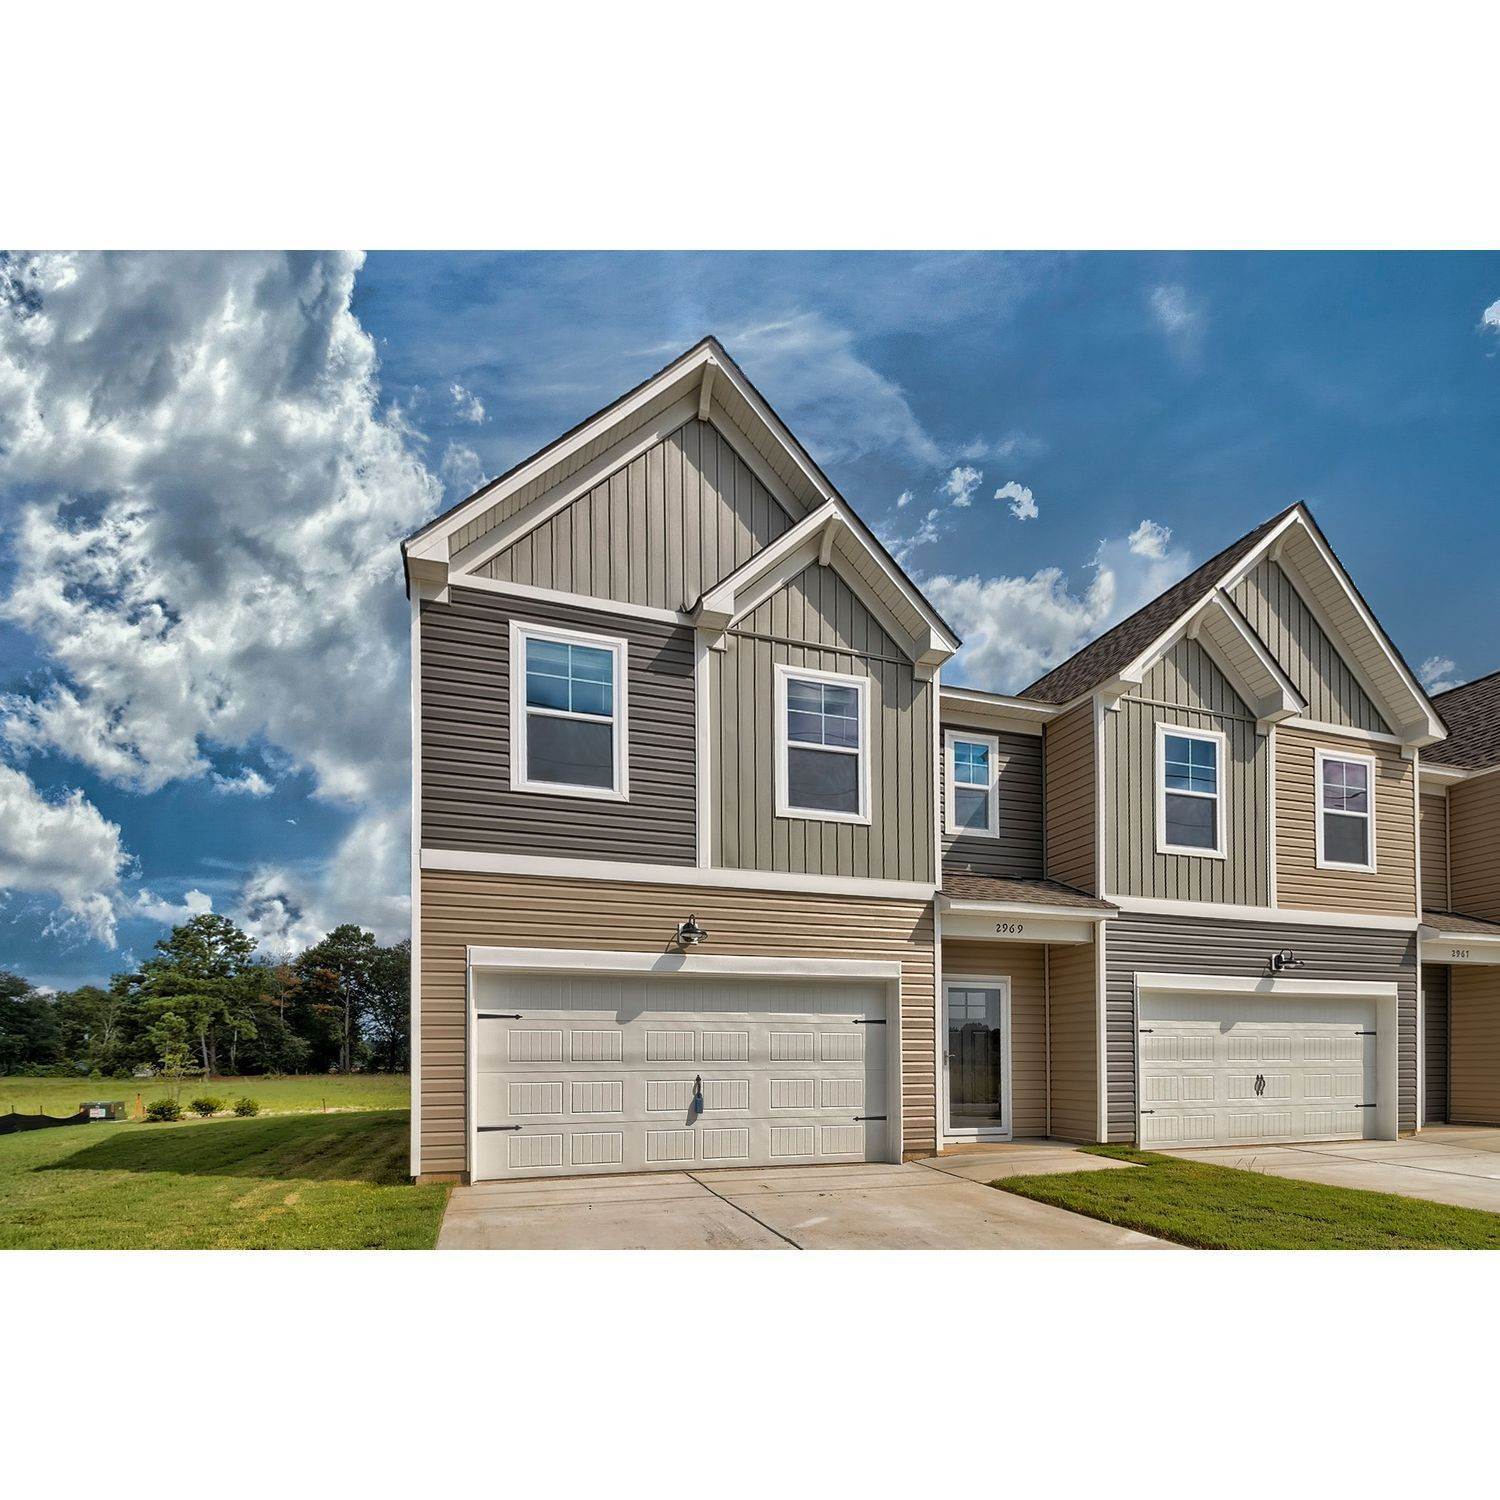 Townhomes at Hunter's Crossing xây dựng tại 1910 Flagpole Drive, Sumter, SC 29150